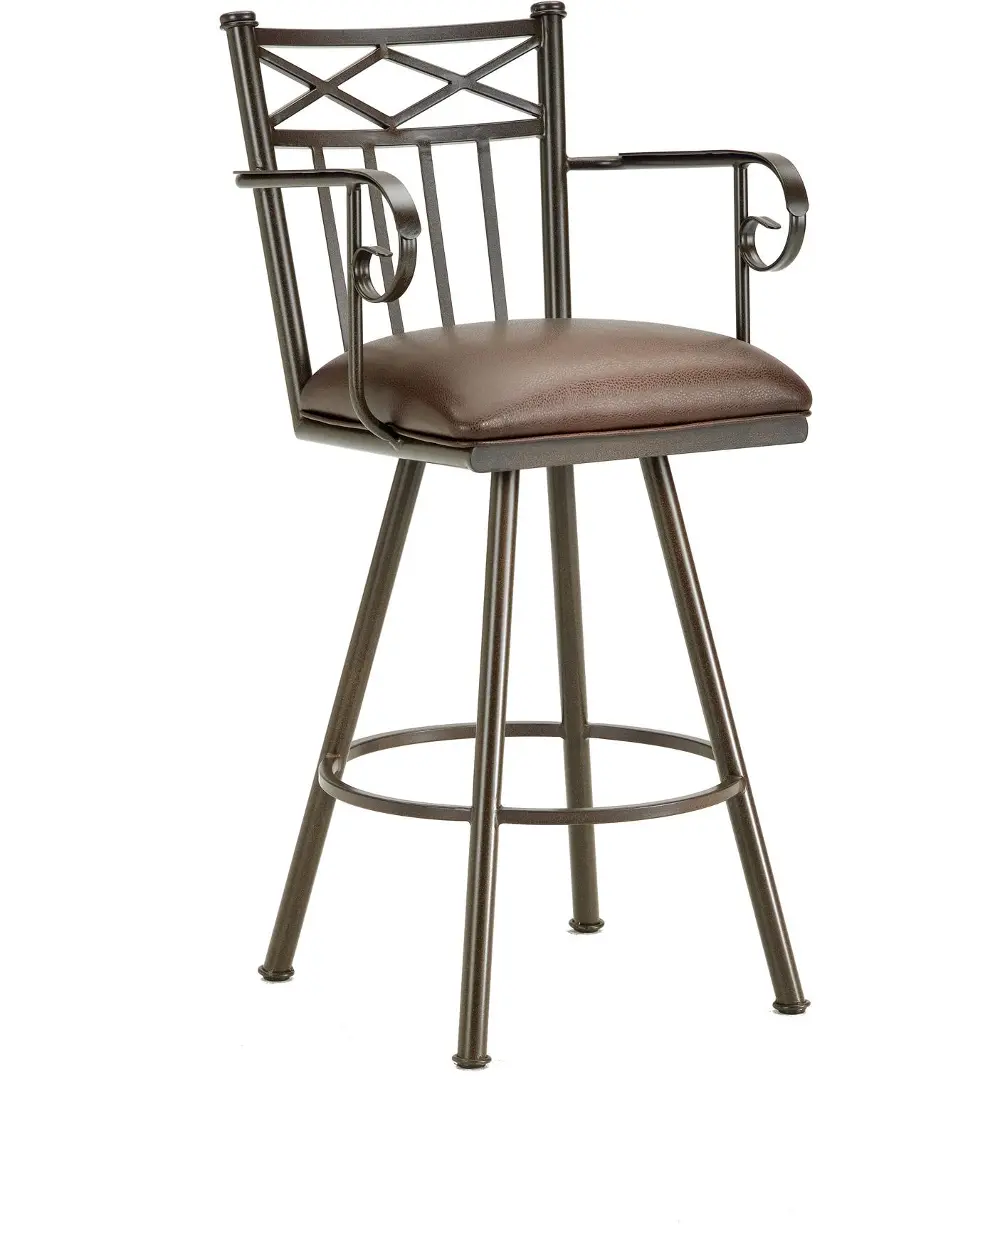 Brown and Rust Metal Swivel Bar Stool with Arms - Alexander-1